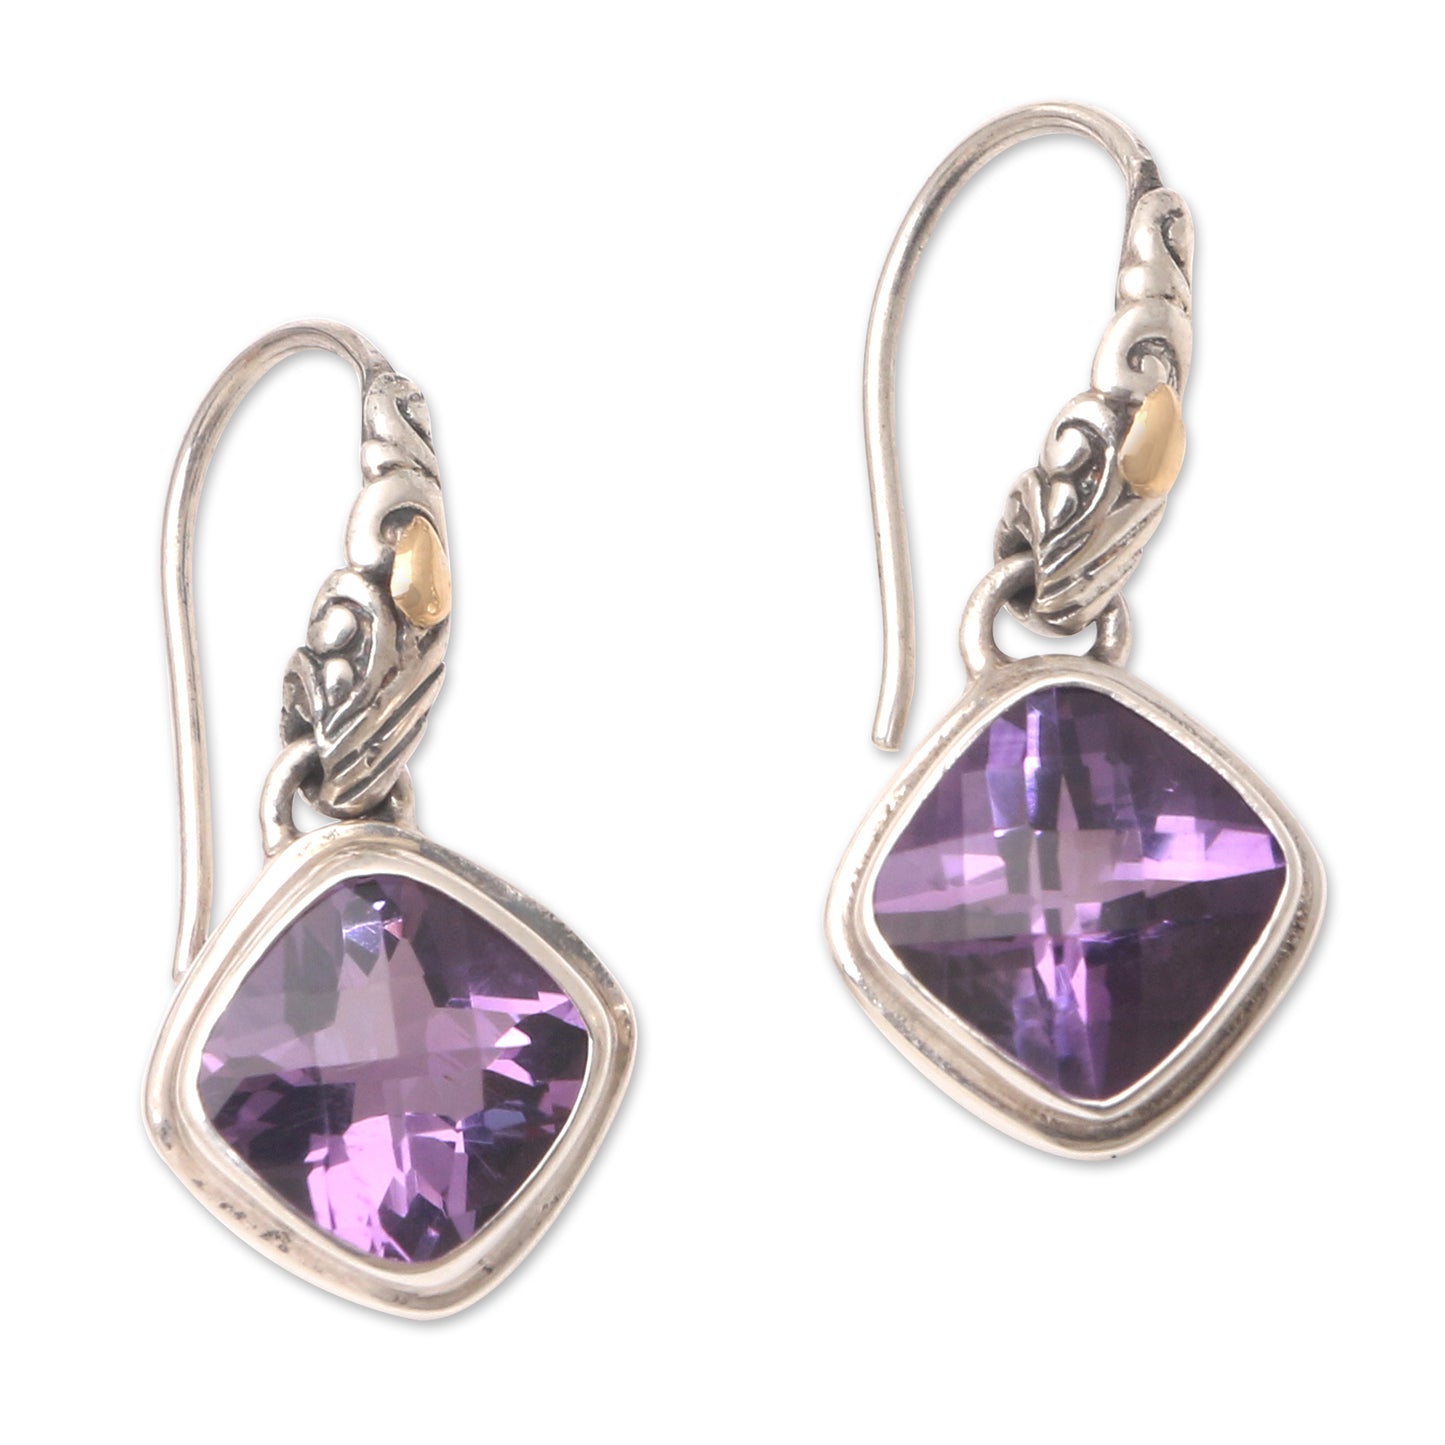 Everlasting Reign Gold-Accented Amethyst Dangle Earrings